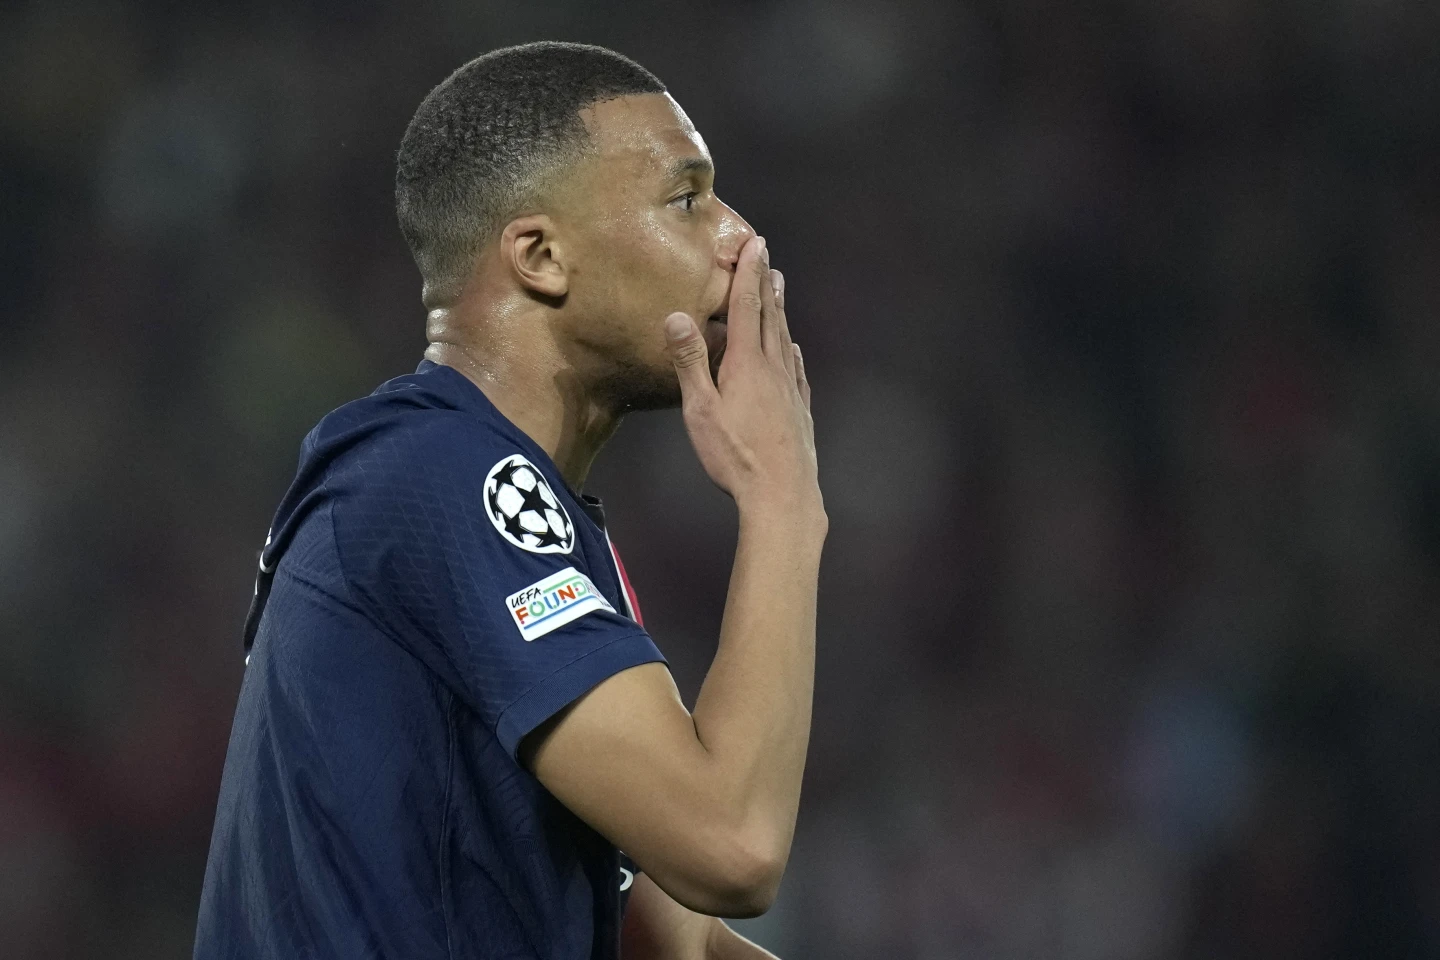 Mbappe's Last Game at Parc des Princes, A Bittersweet Farewell